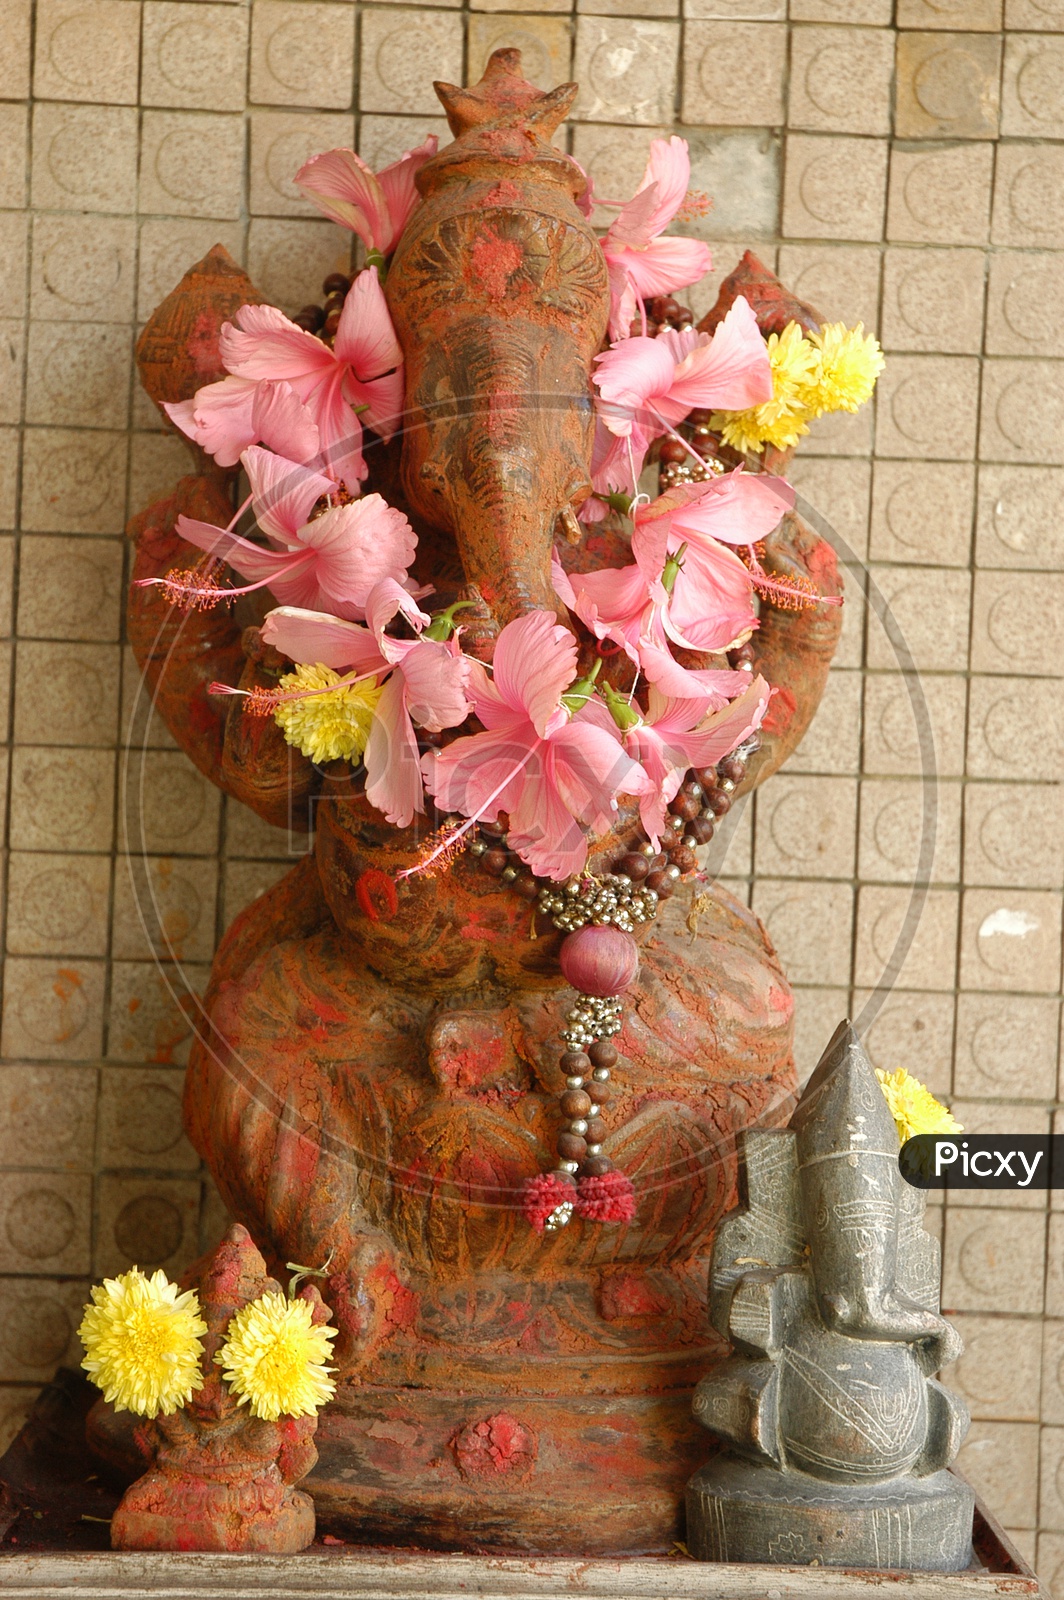 Lord Ganesha Statue decorated with flowers